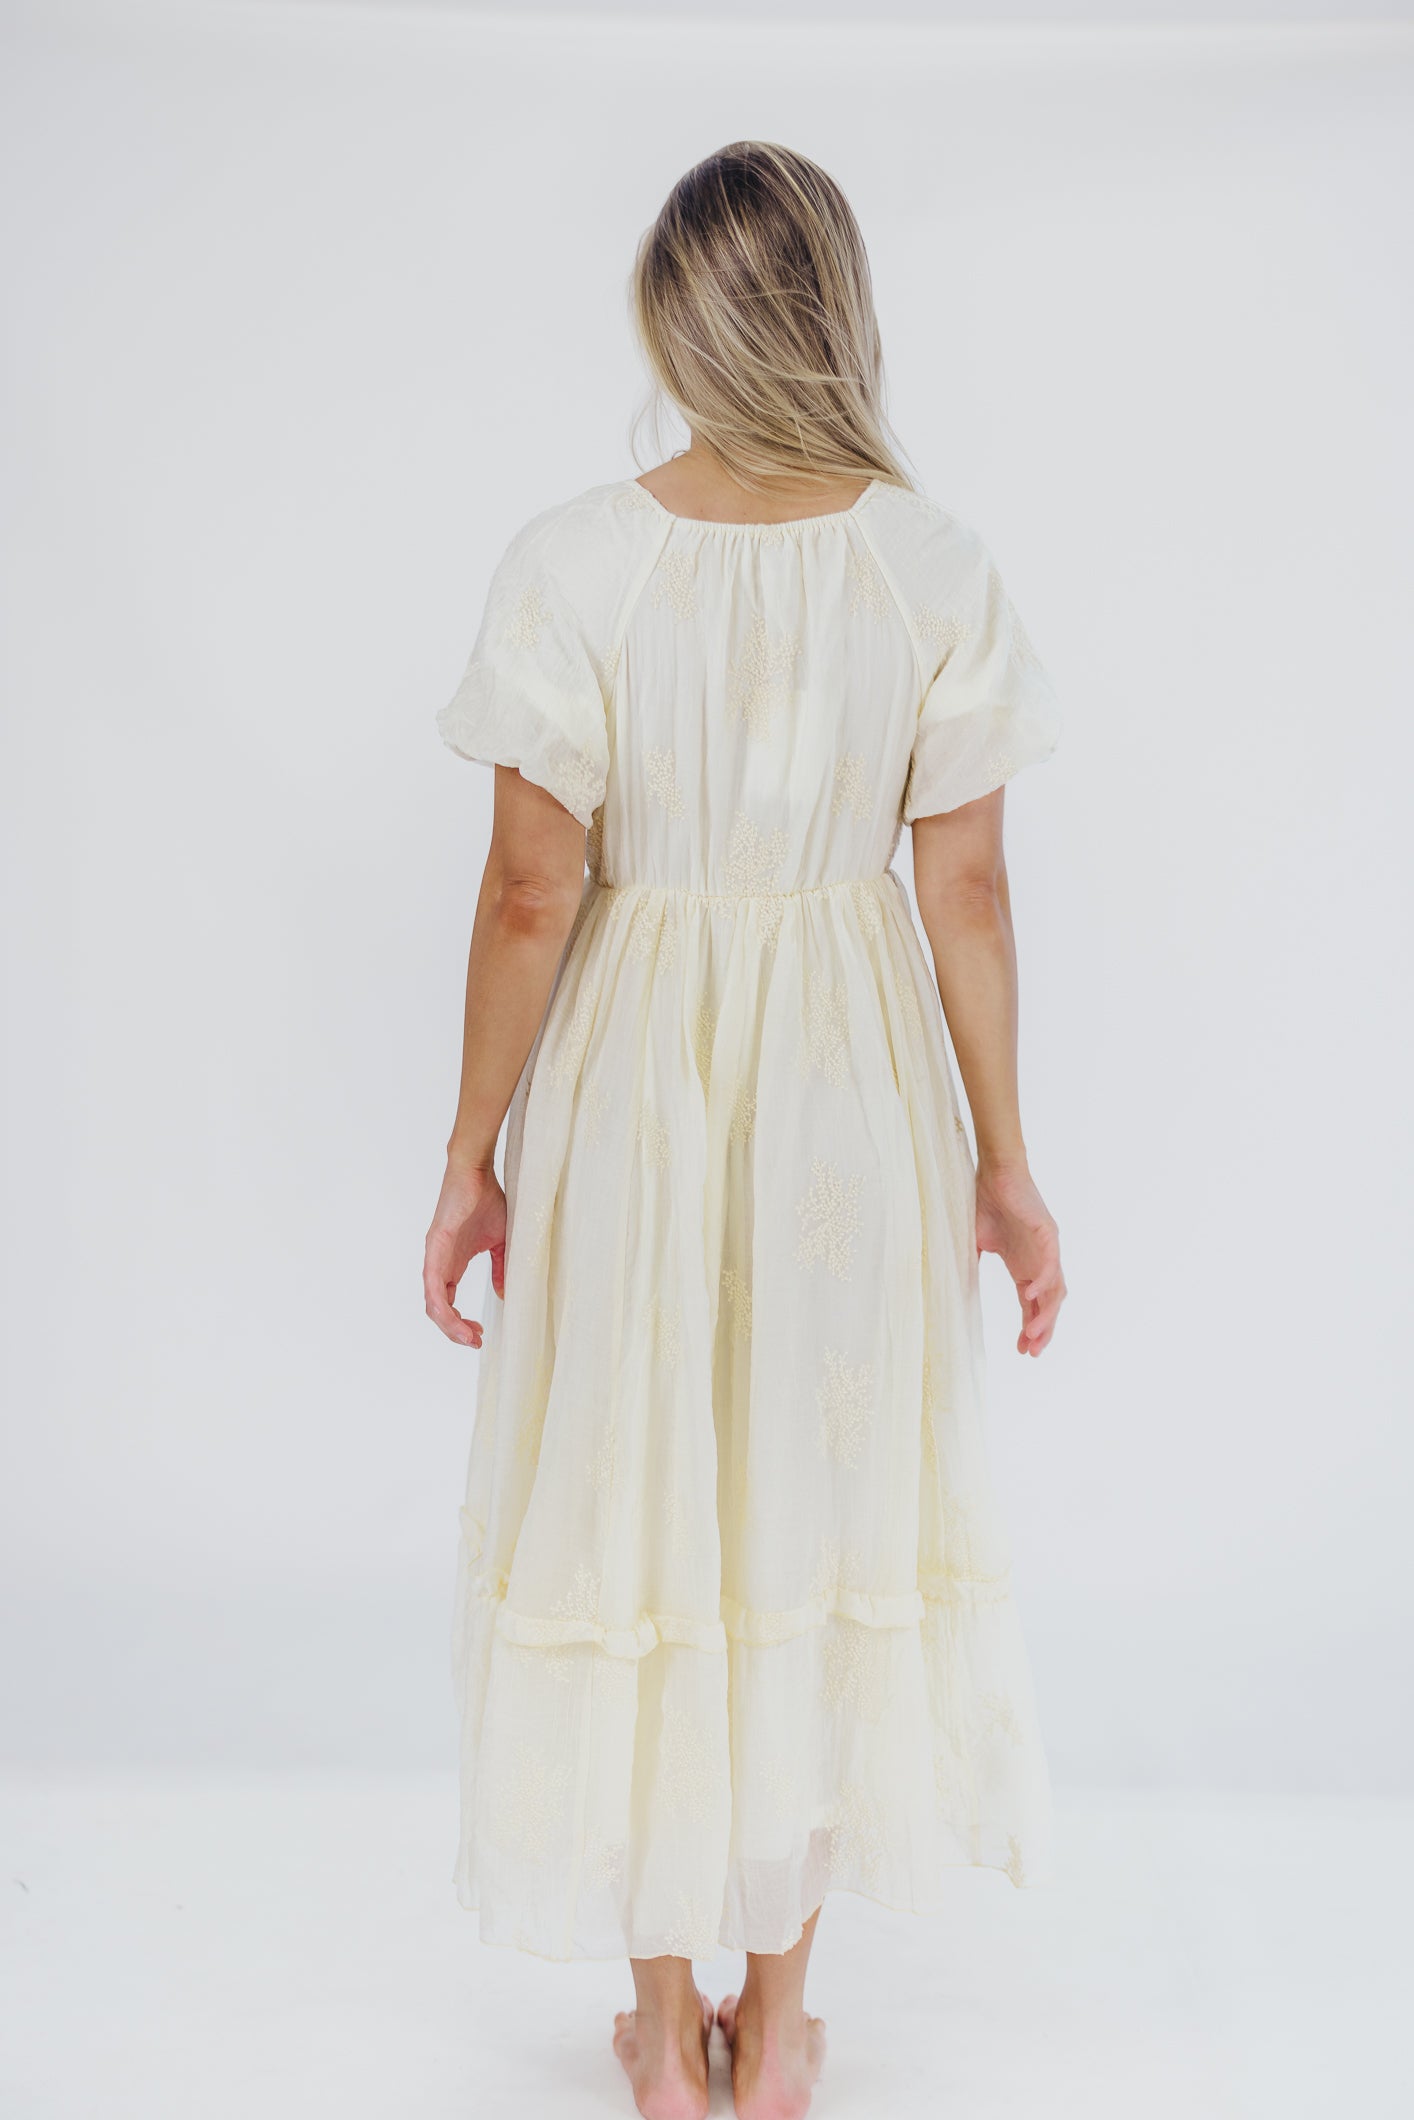 Hallie Embroidered Maxi Dress in Cream - Bump Friendly & Inclusive Sizing (S-3XL)